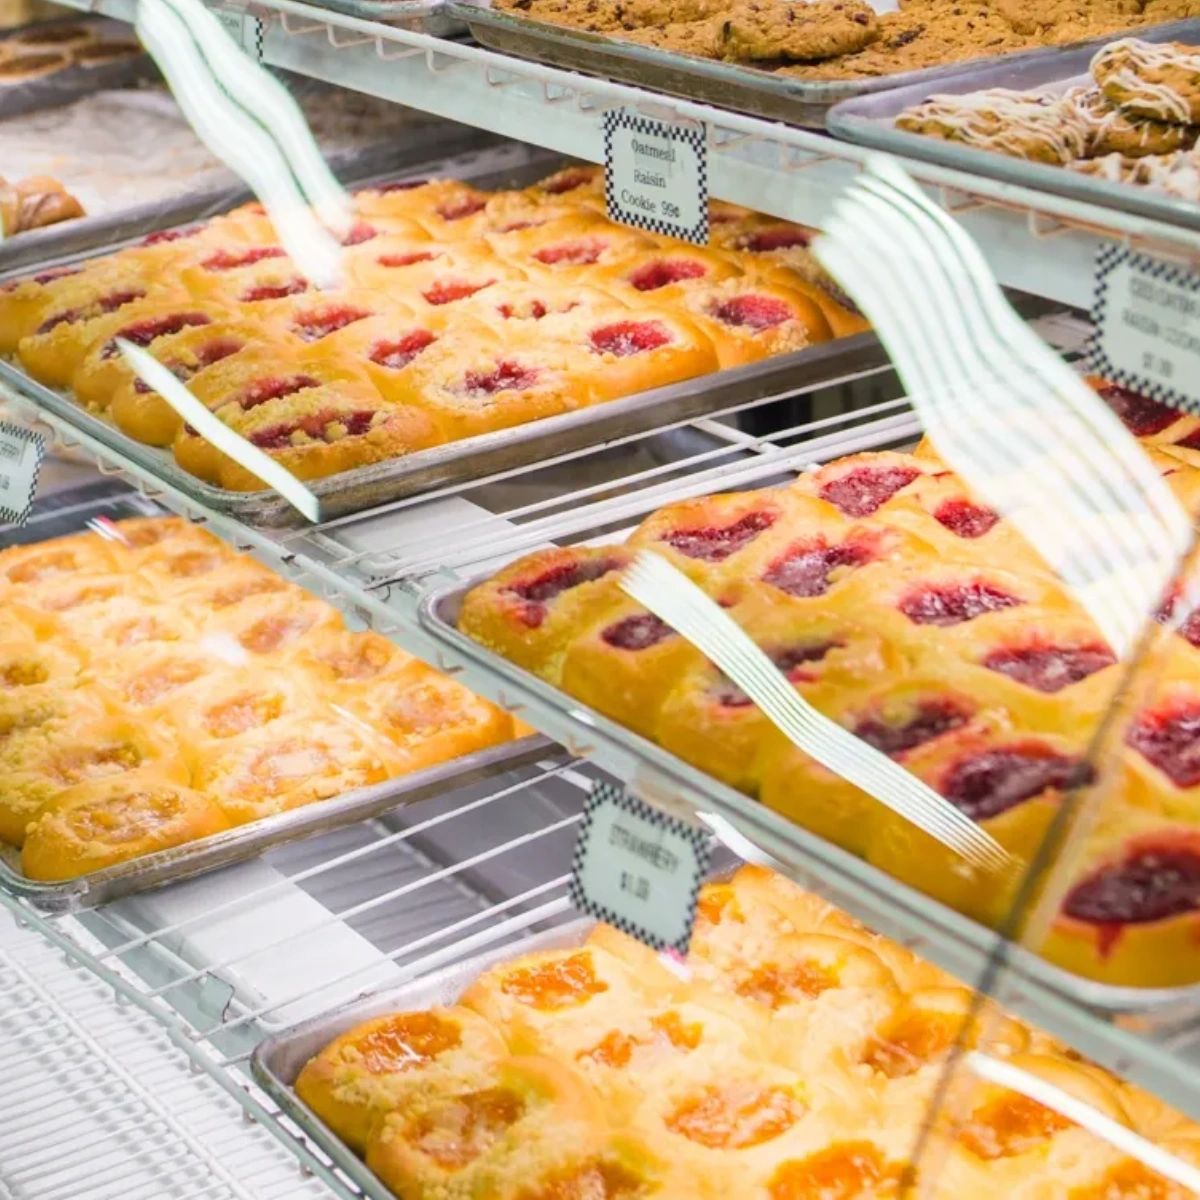 If you're looking for tasty goodies you won't forget, just follow the scent of freshly made kolaches right down I-35! It'll lead you straight to our bakery, where over 37 flavor combinations await😋 #czechoutourkolaches #czechoutslovaceks #slovacekswest #deliciouseats #czech